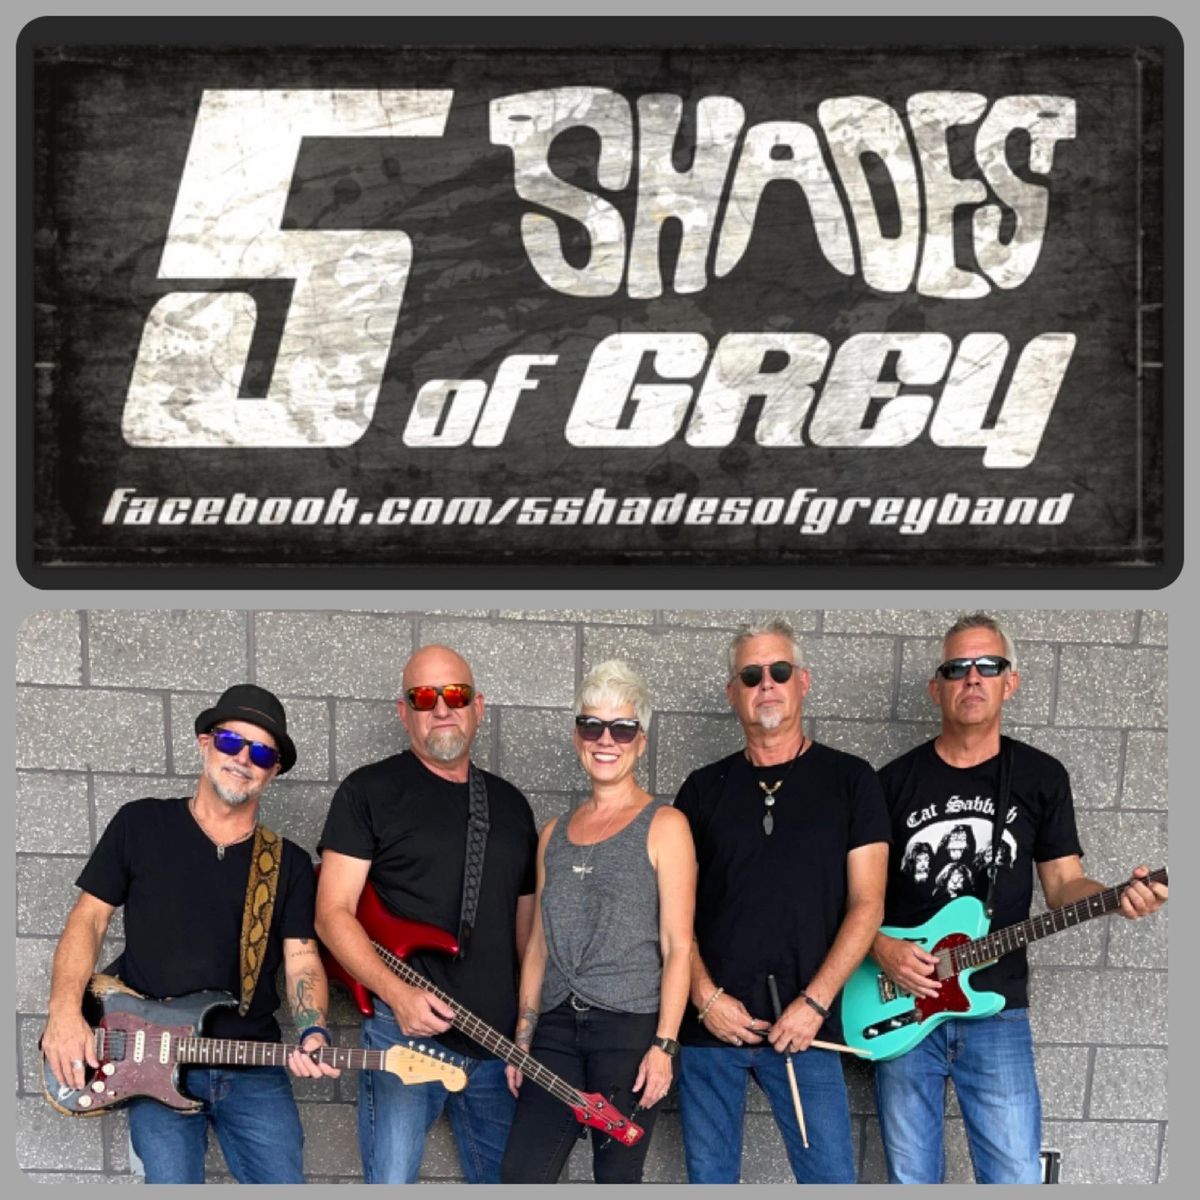 Saturday, 7\/13 - Live Music by 5 Shades of Grey - 7:30pm-10:30pm